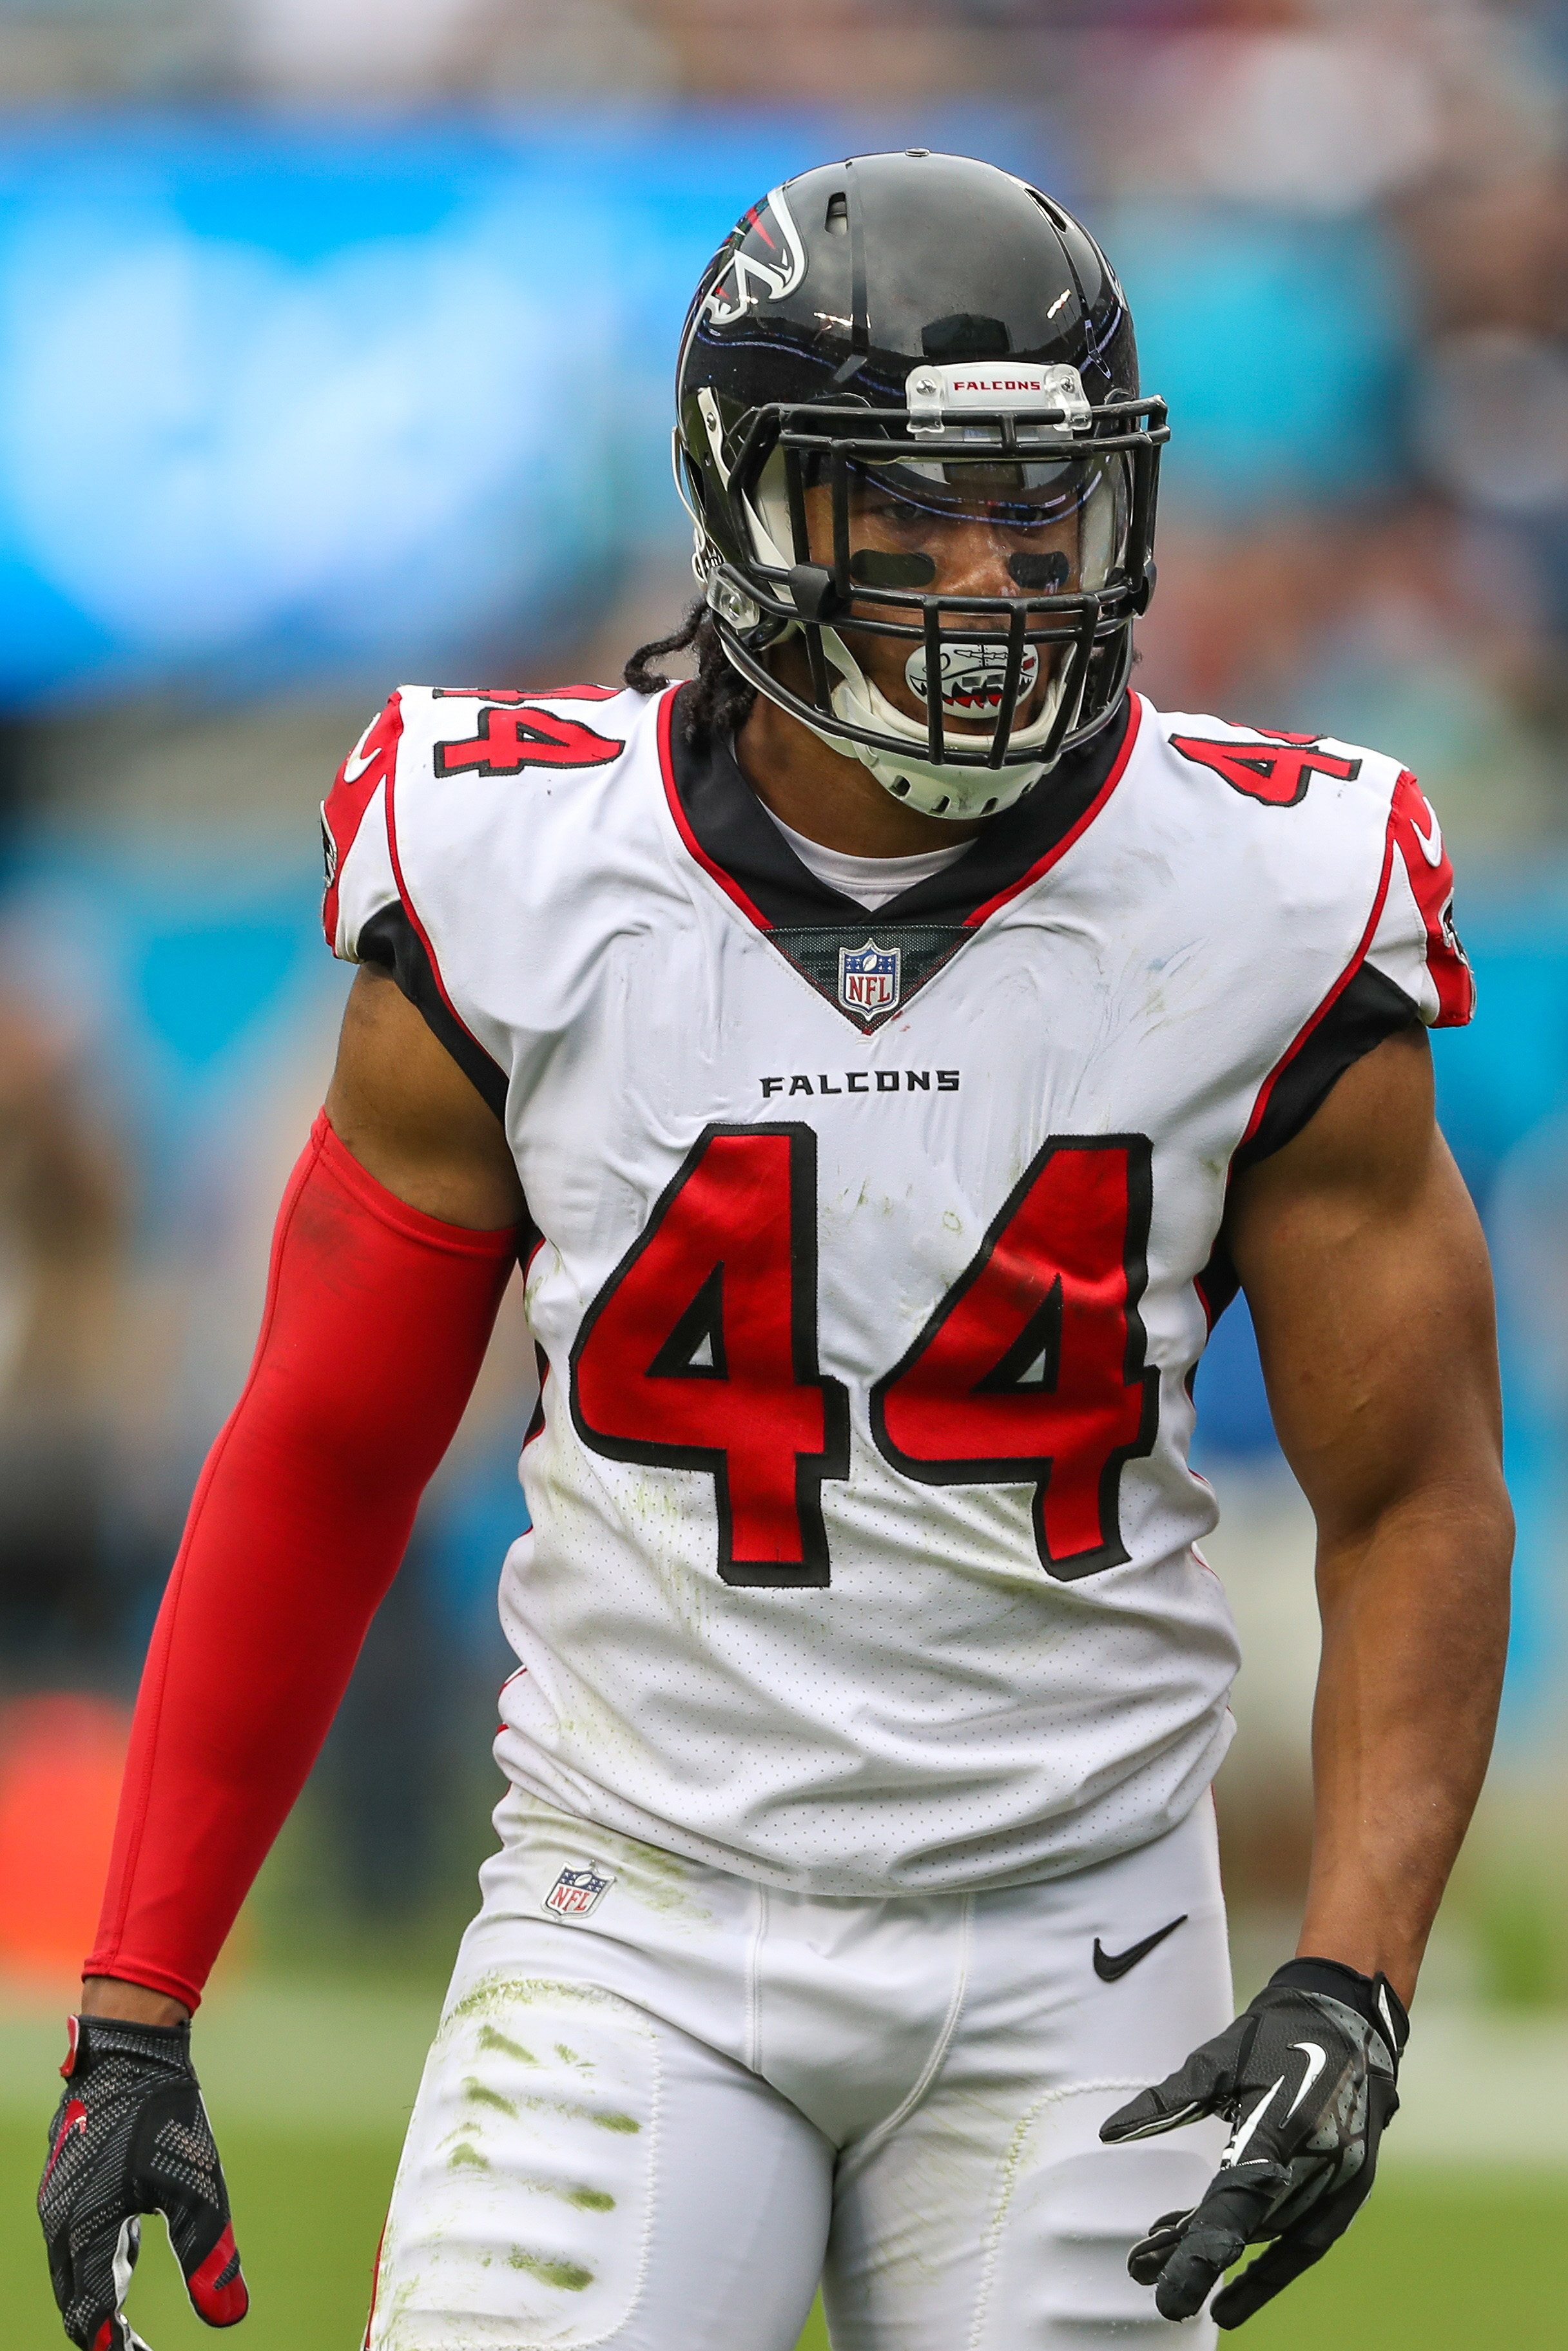 Latest On Titans, Vic Beasley